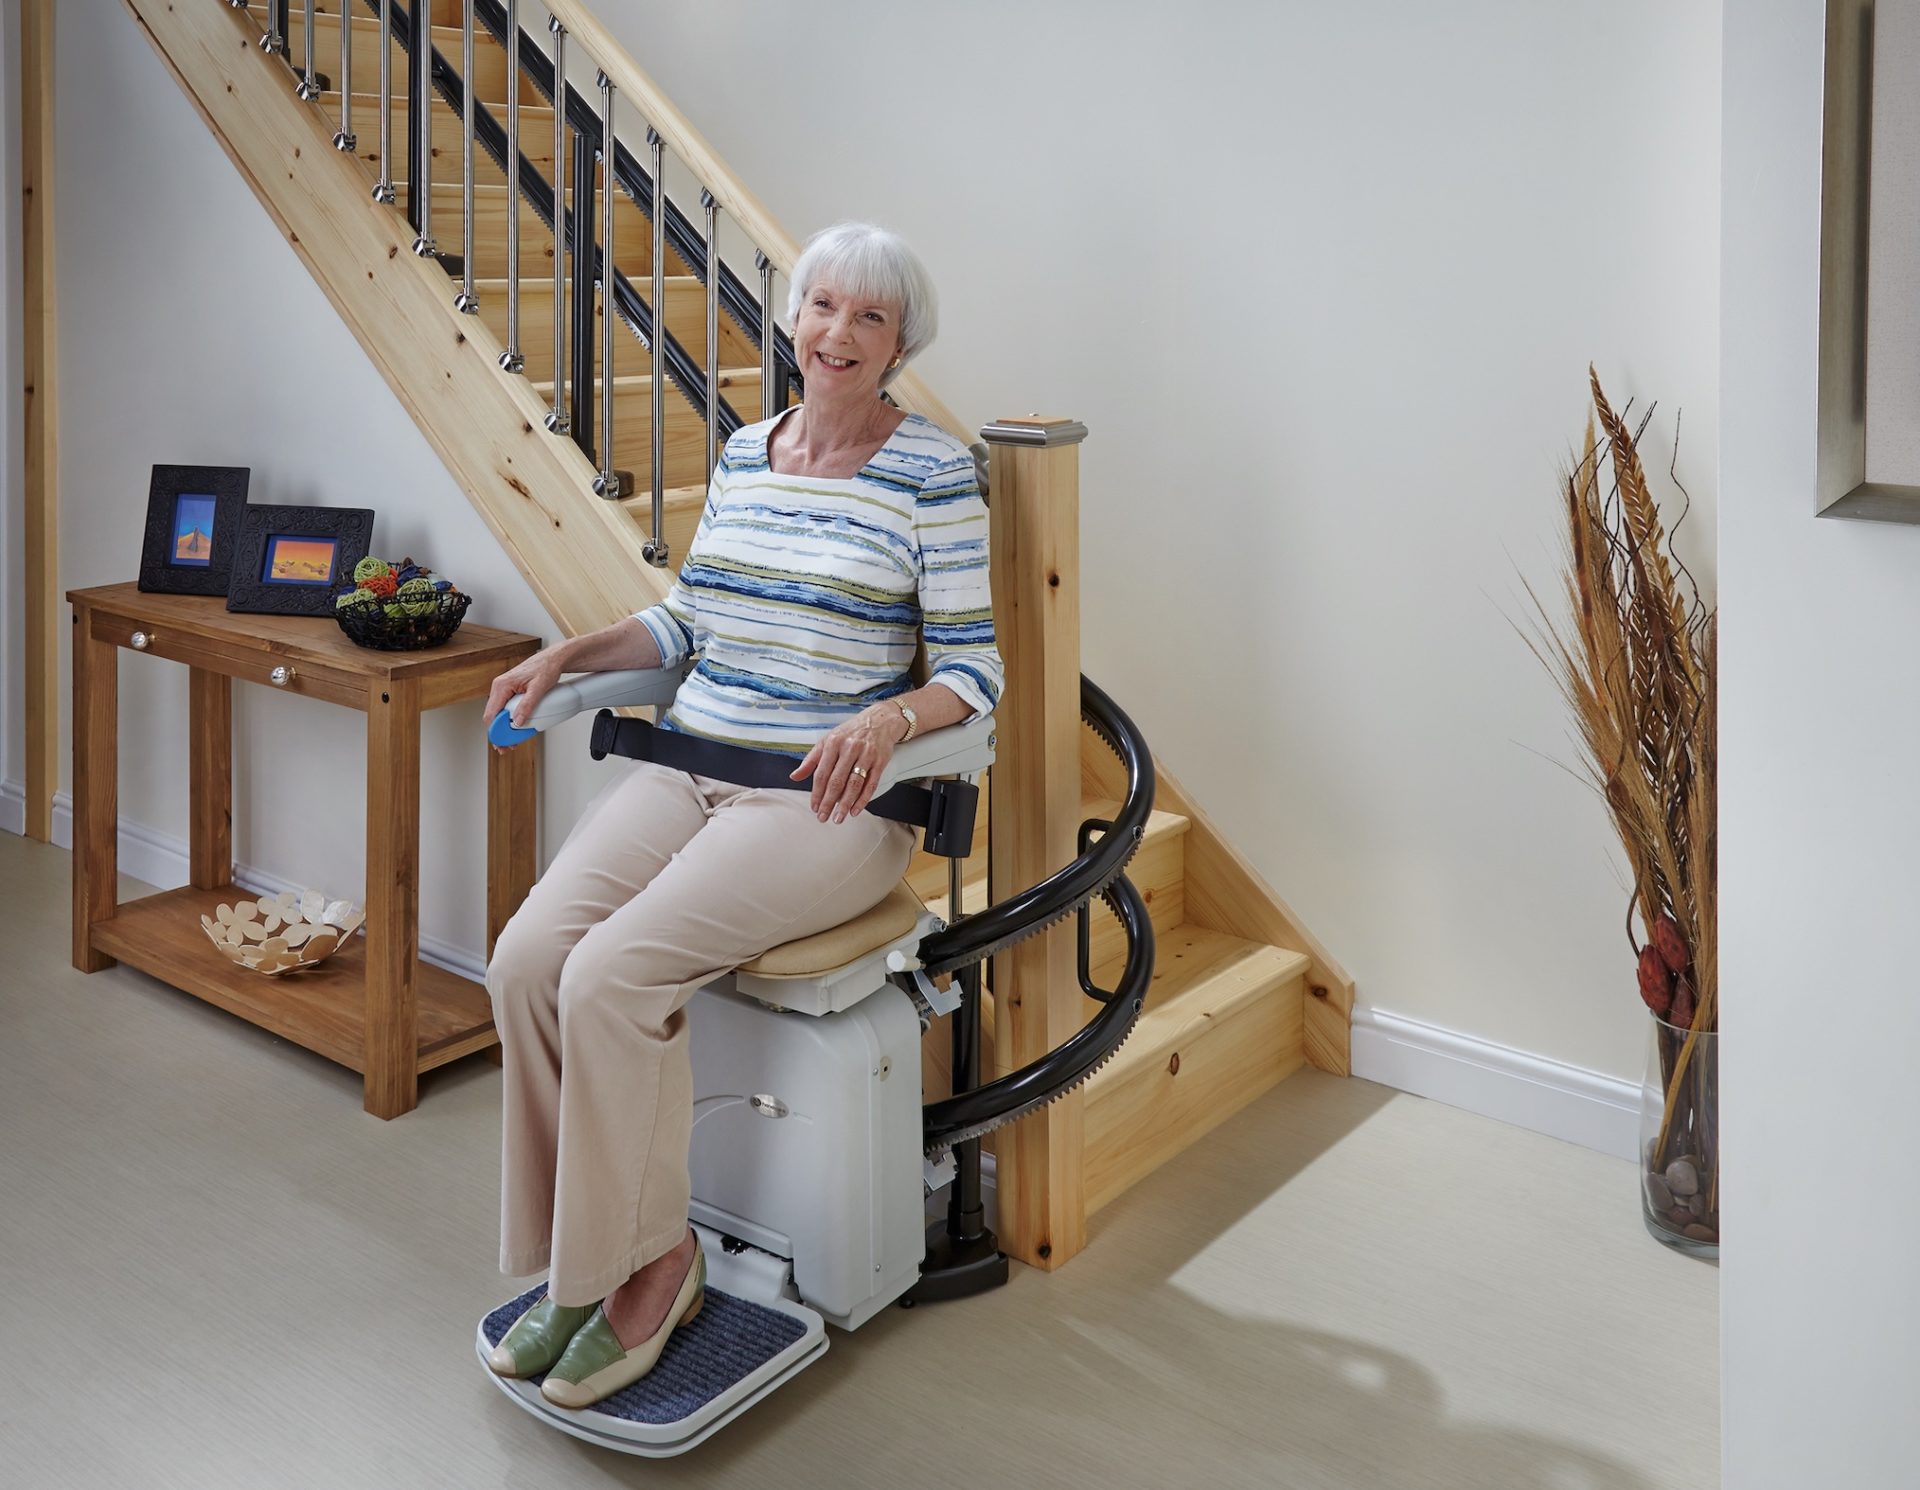 Stair Lifts Provide Independence Next Day Access